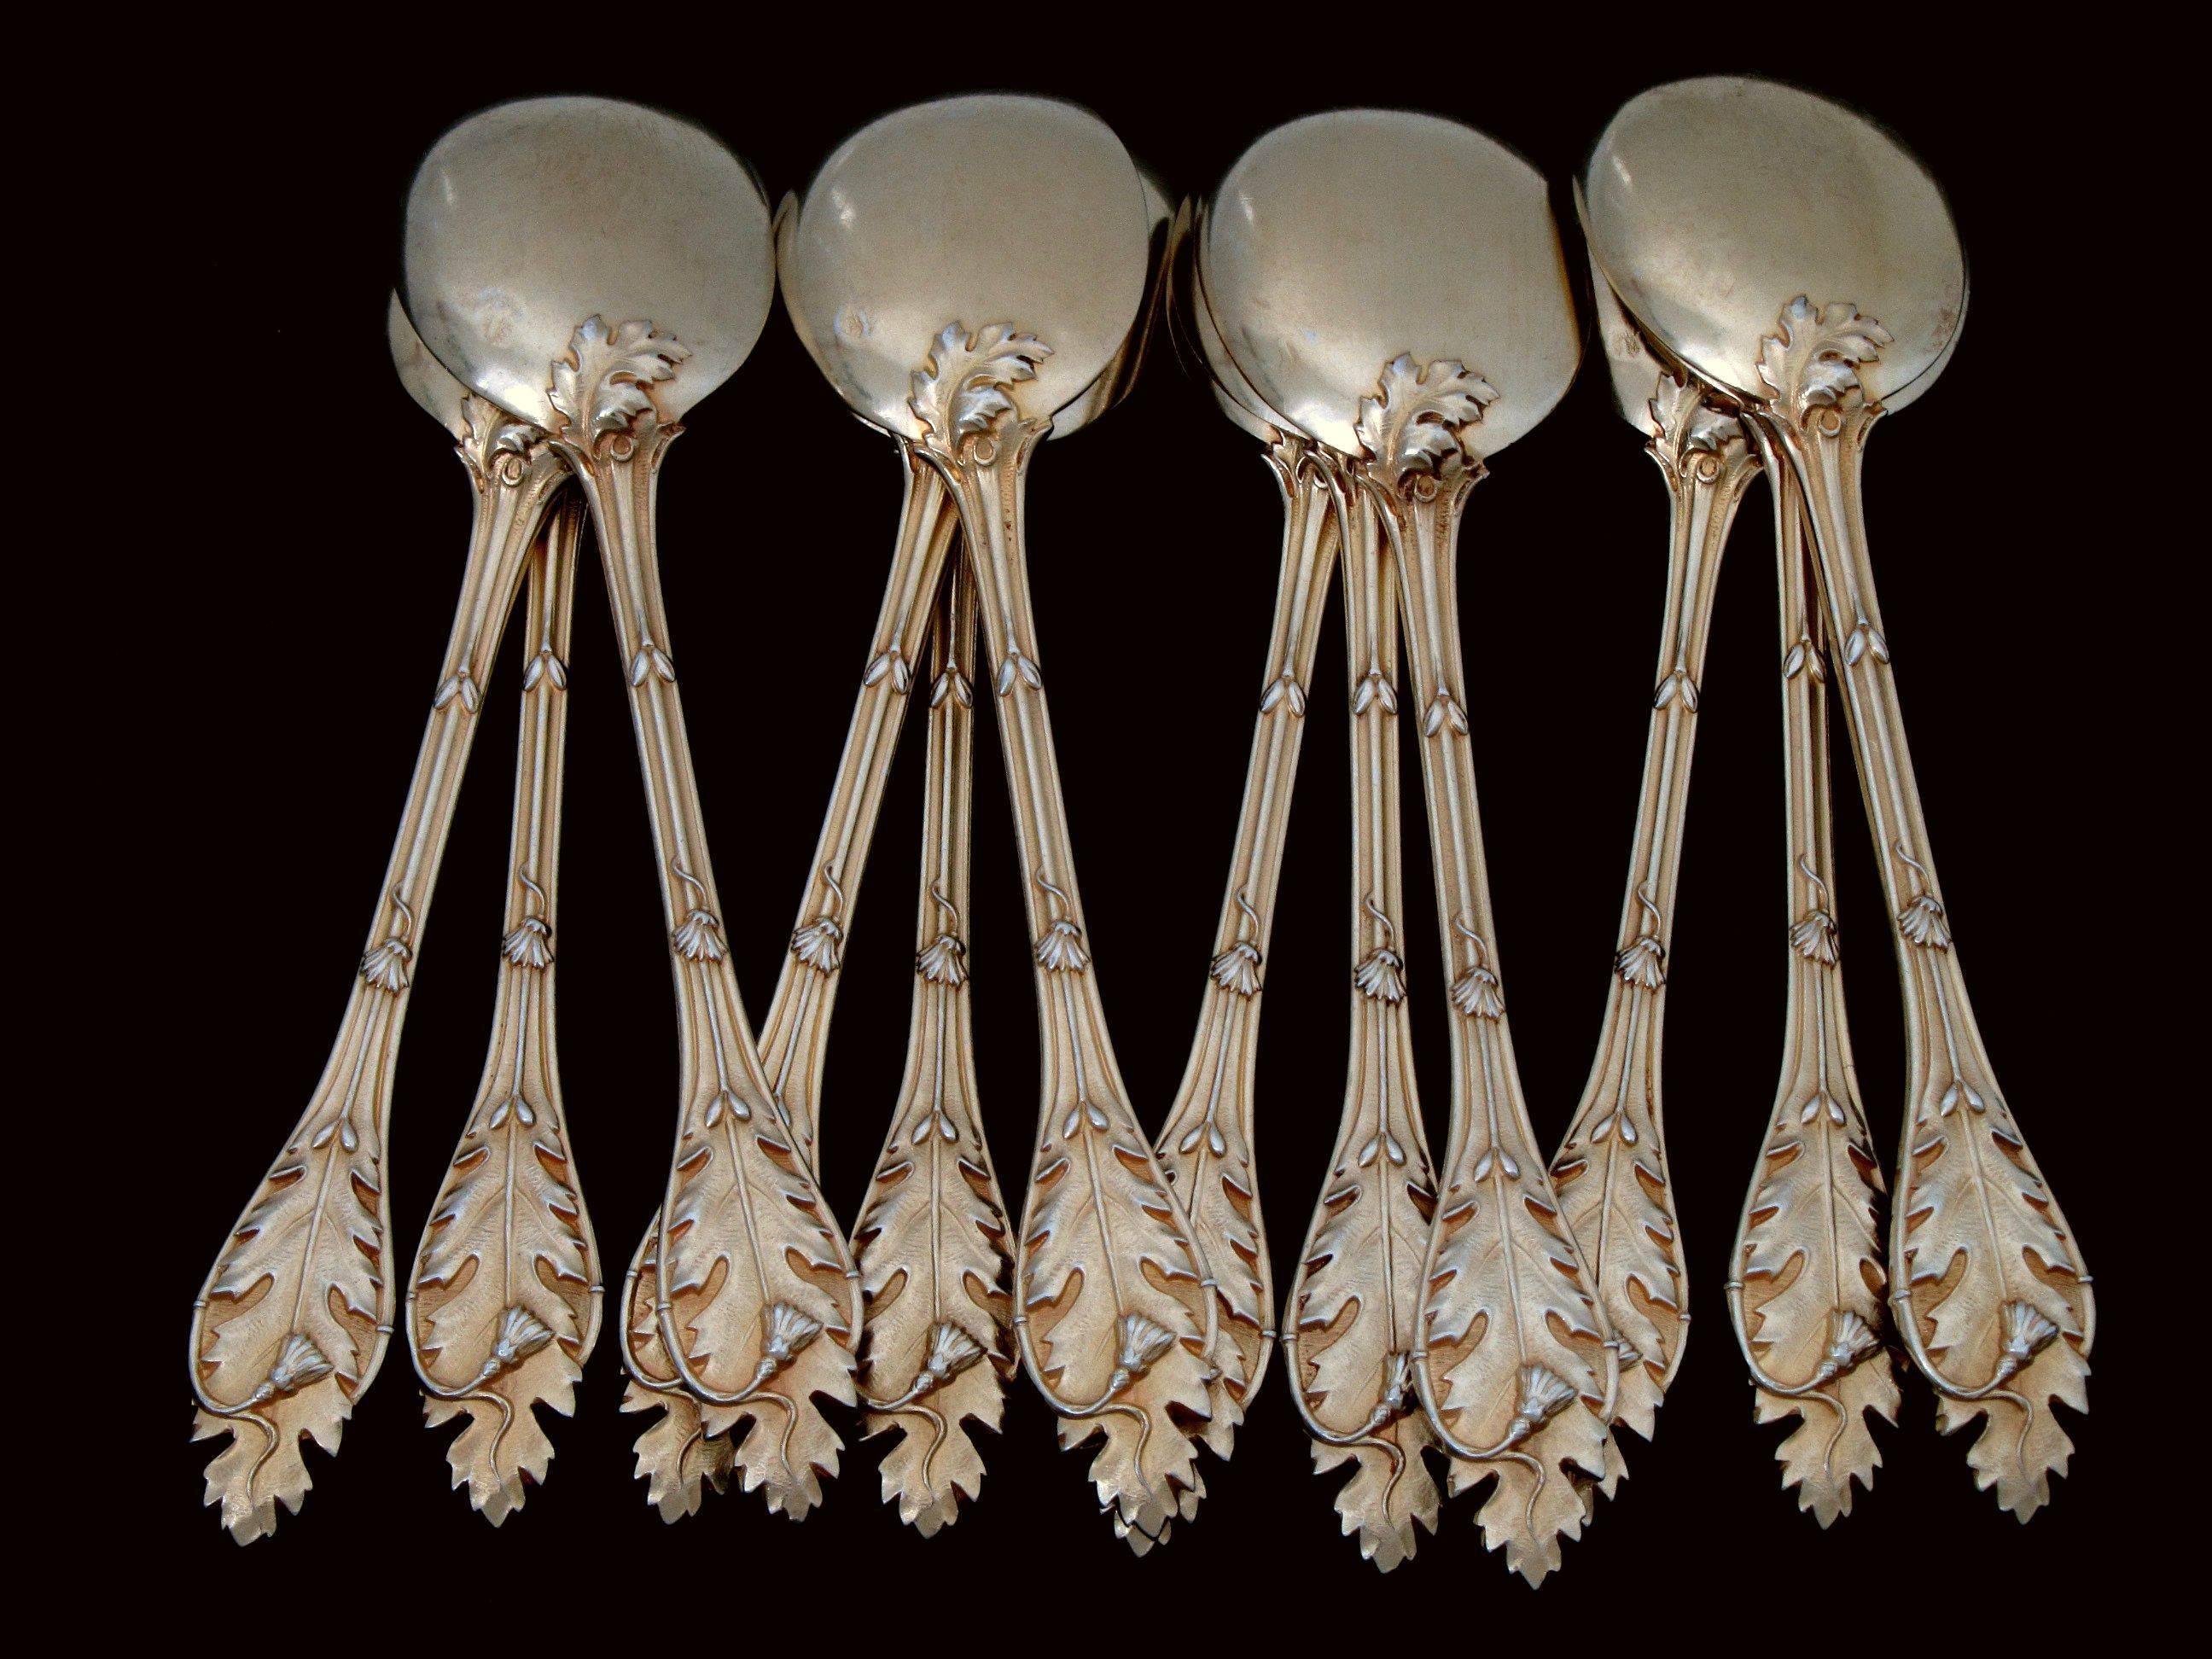 Linzeler Masterpiece French Sterling Silver Vermeil Ice Cream Spoons Set 12 pc For Sale 2